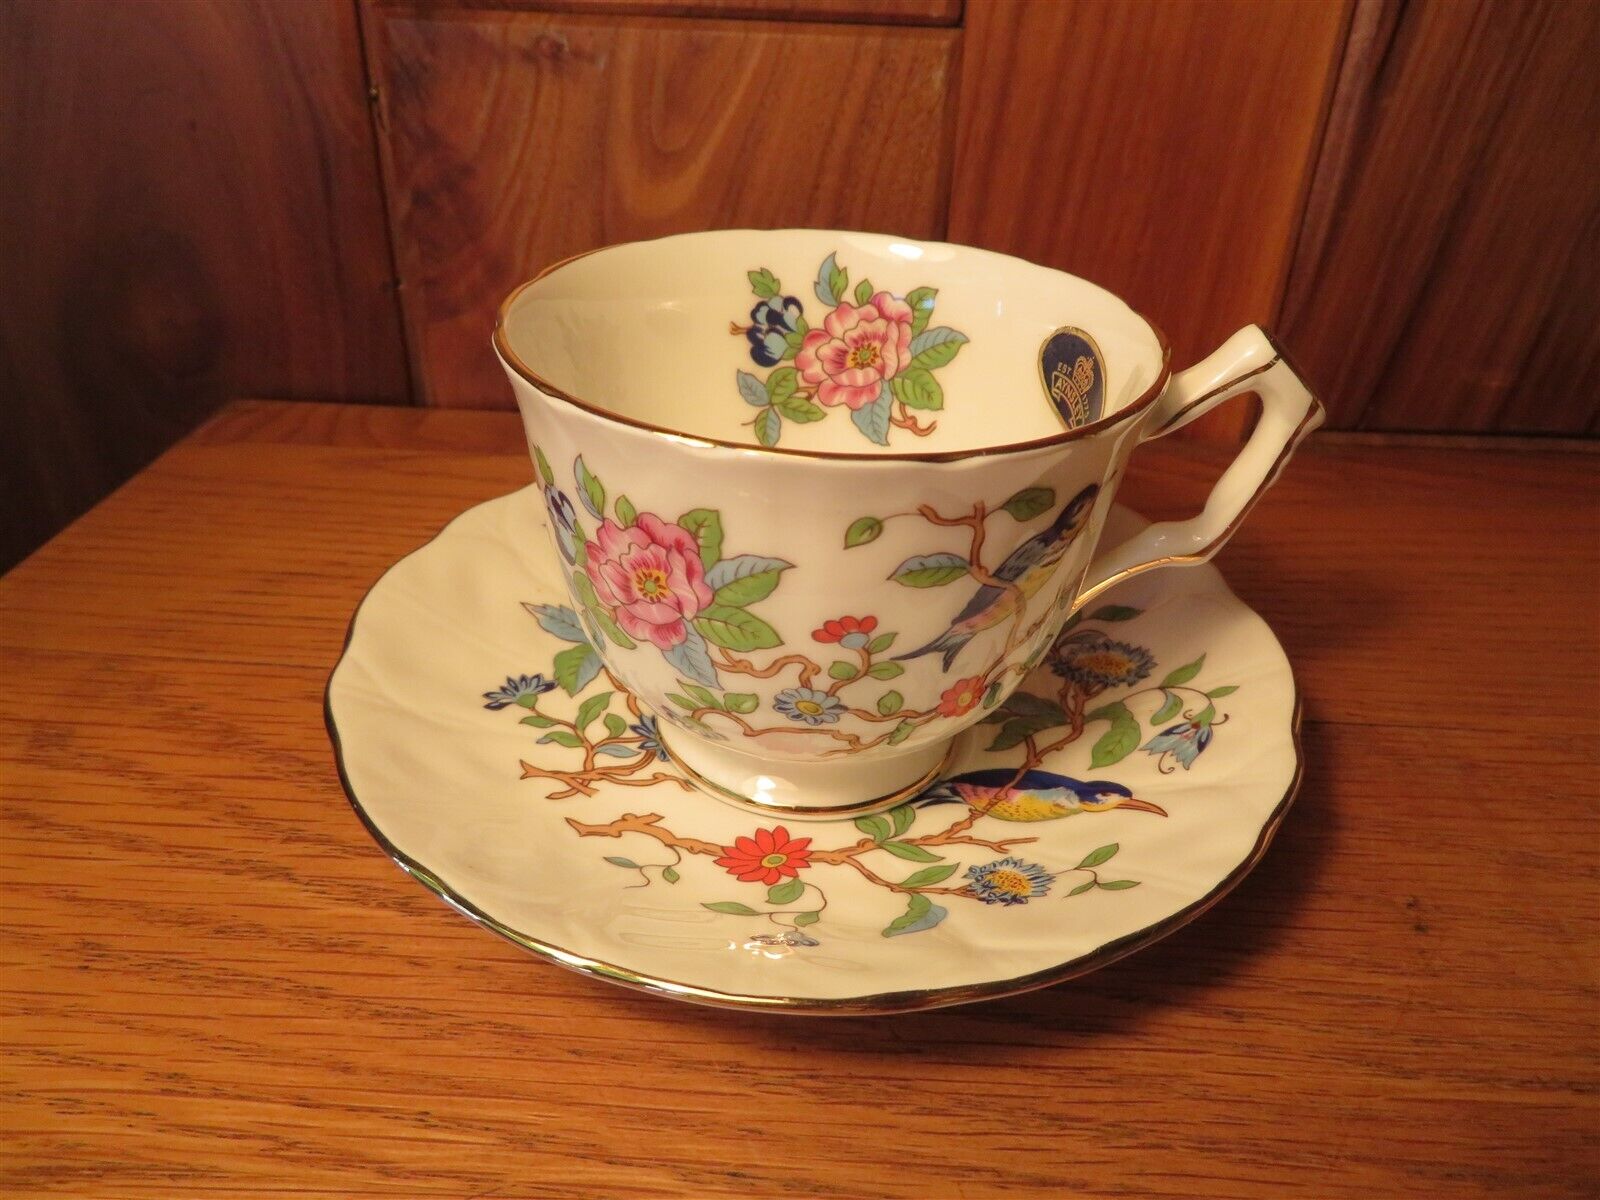 VINT ENGLISH AYNSLEY PORCELAIN CUP/SAUCER SET - BIRD IN PEONY FLORAL W GOLD